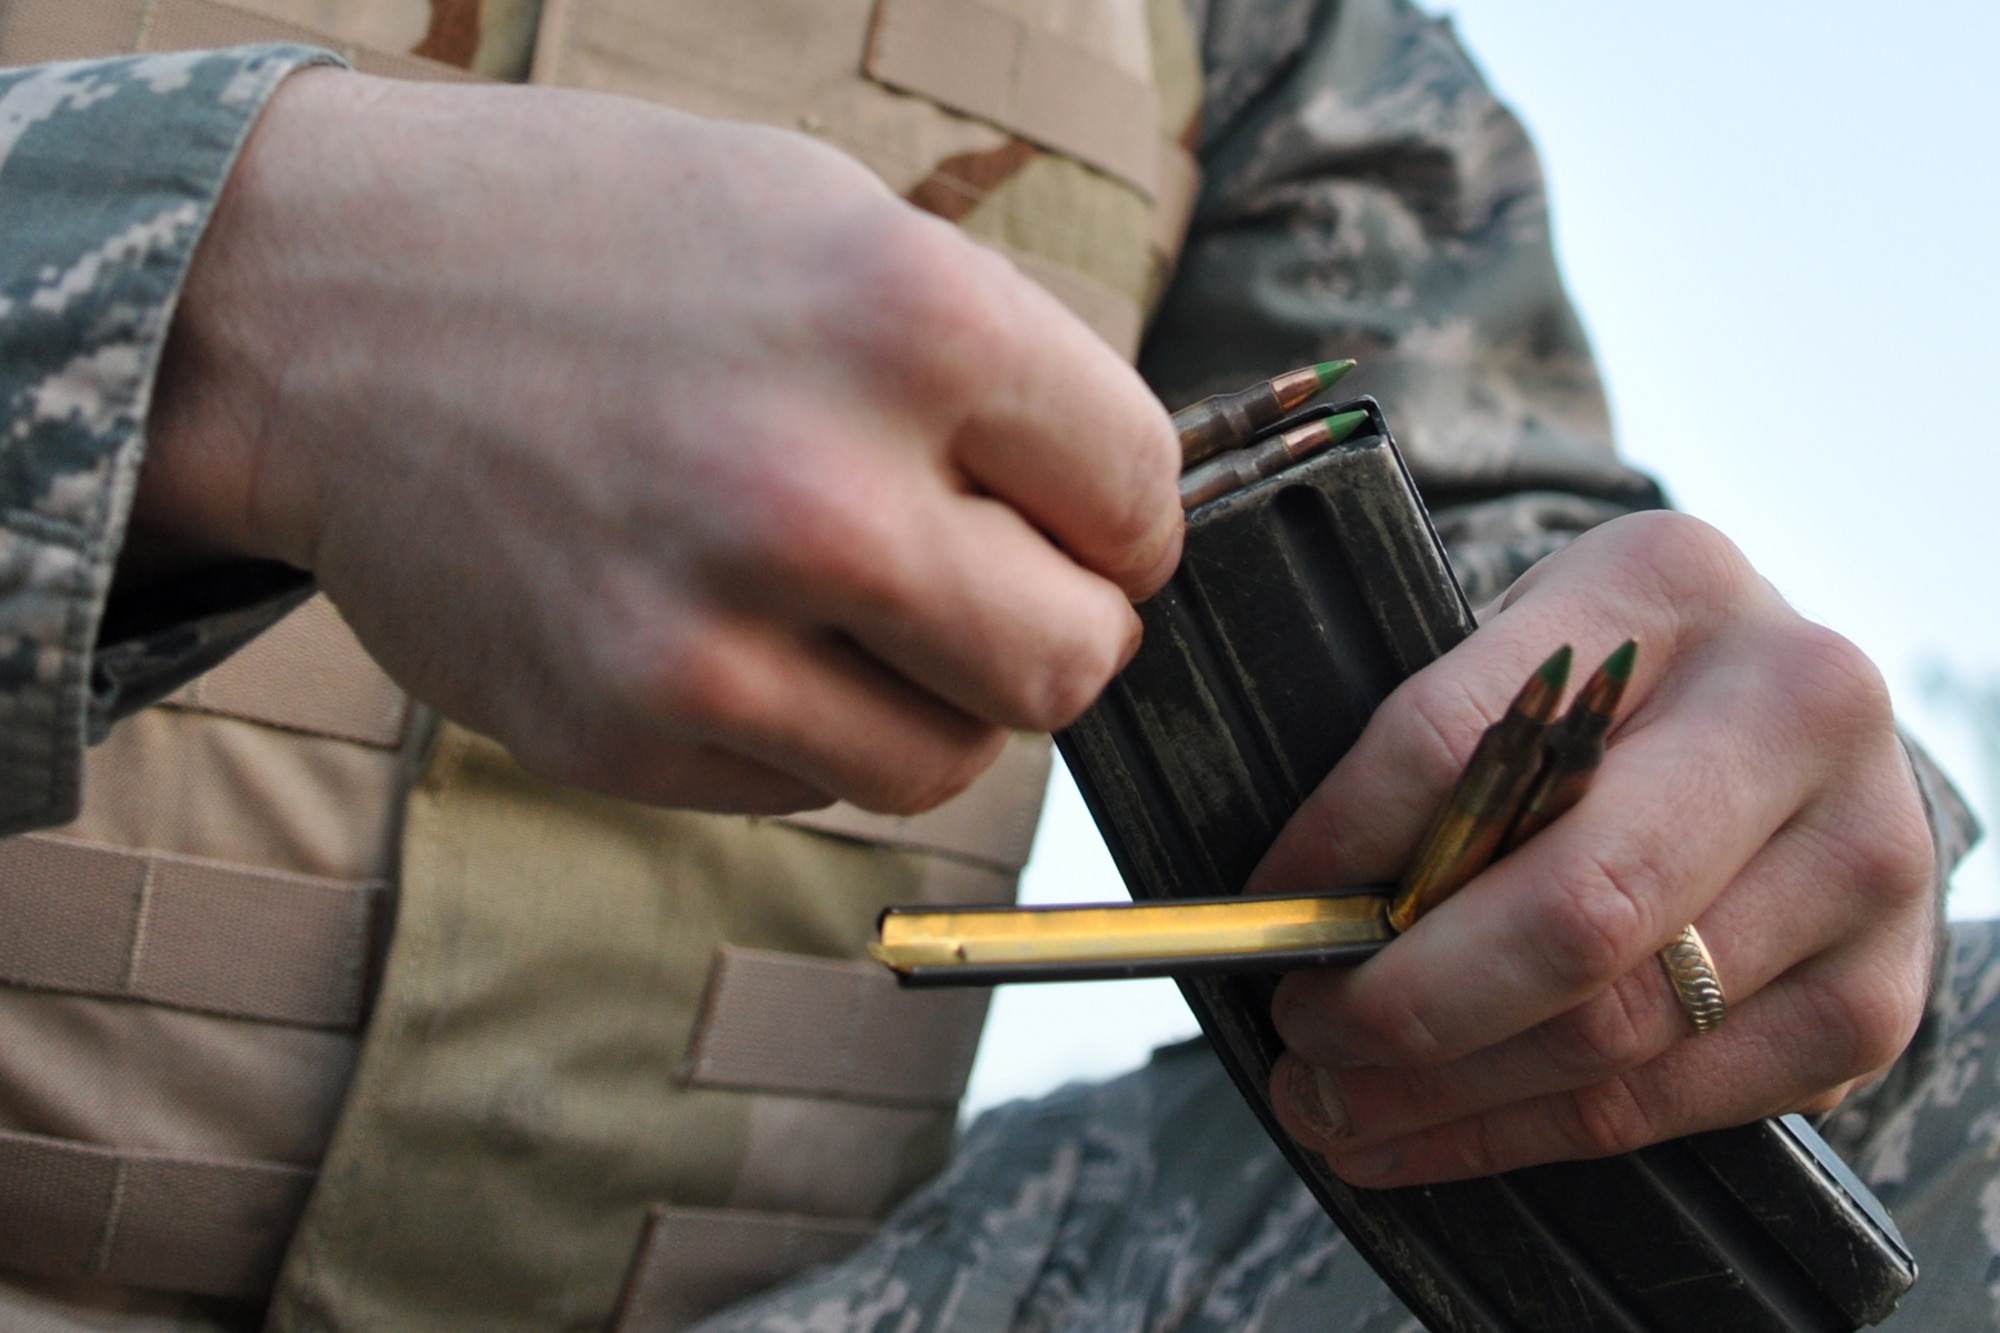 Master Sgt. Jason Colvin, an engineer assistant assigned to the 307th Civil Engineer Squadron, loads a magazine at a firing range near Barksdale Air Force Base, La., Nov. 3, 2012. (U.S. Air Force photo by Master Sgt. Jeff Walston/Released) 